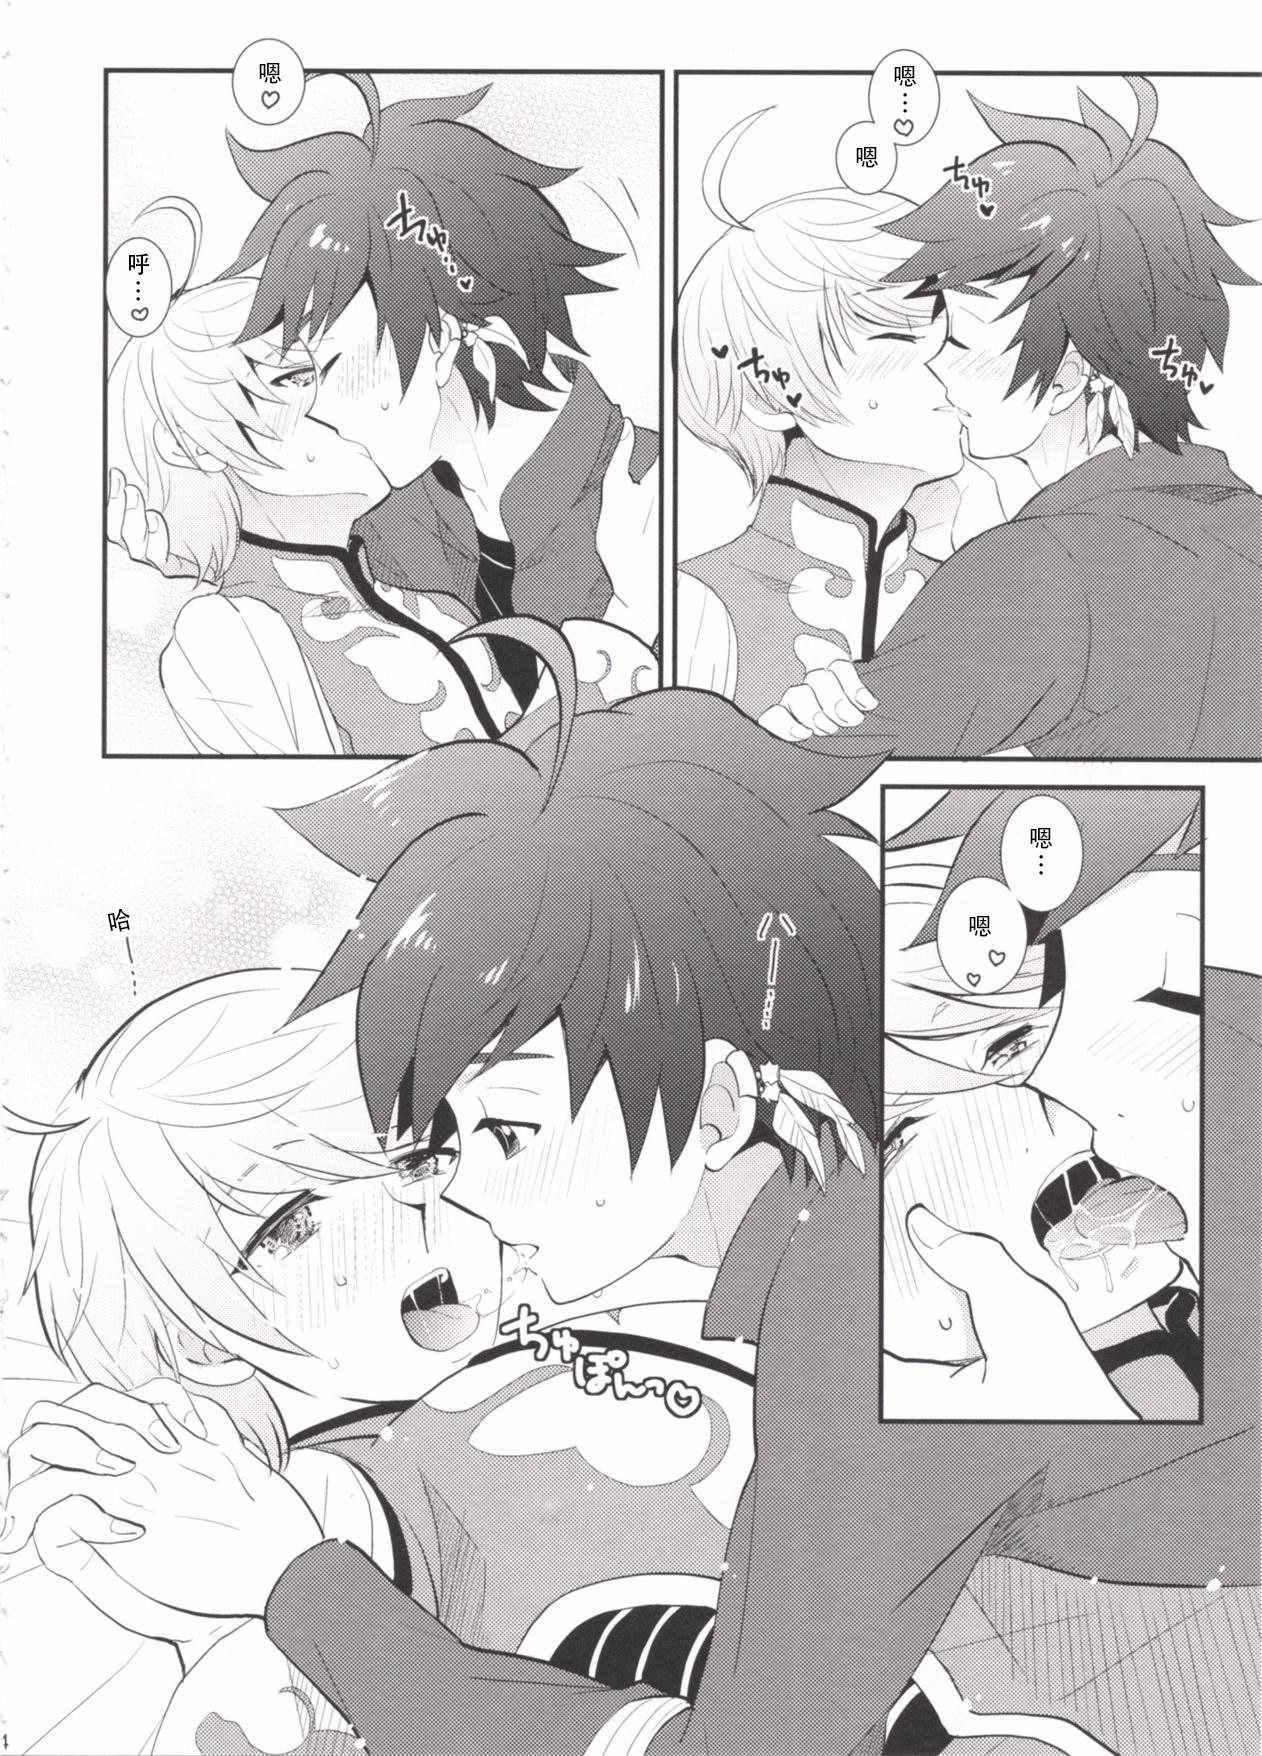 Pawg とろける体温 - Tales of zestiria Doggystyle - Page 3